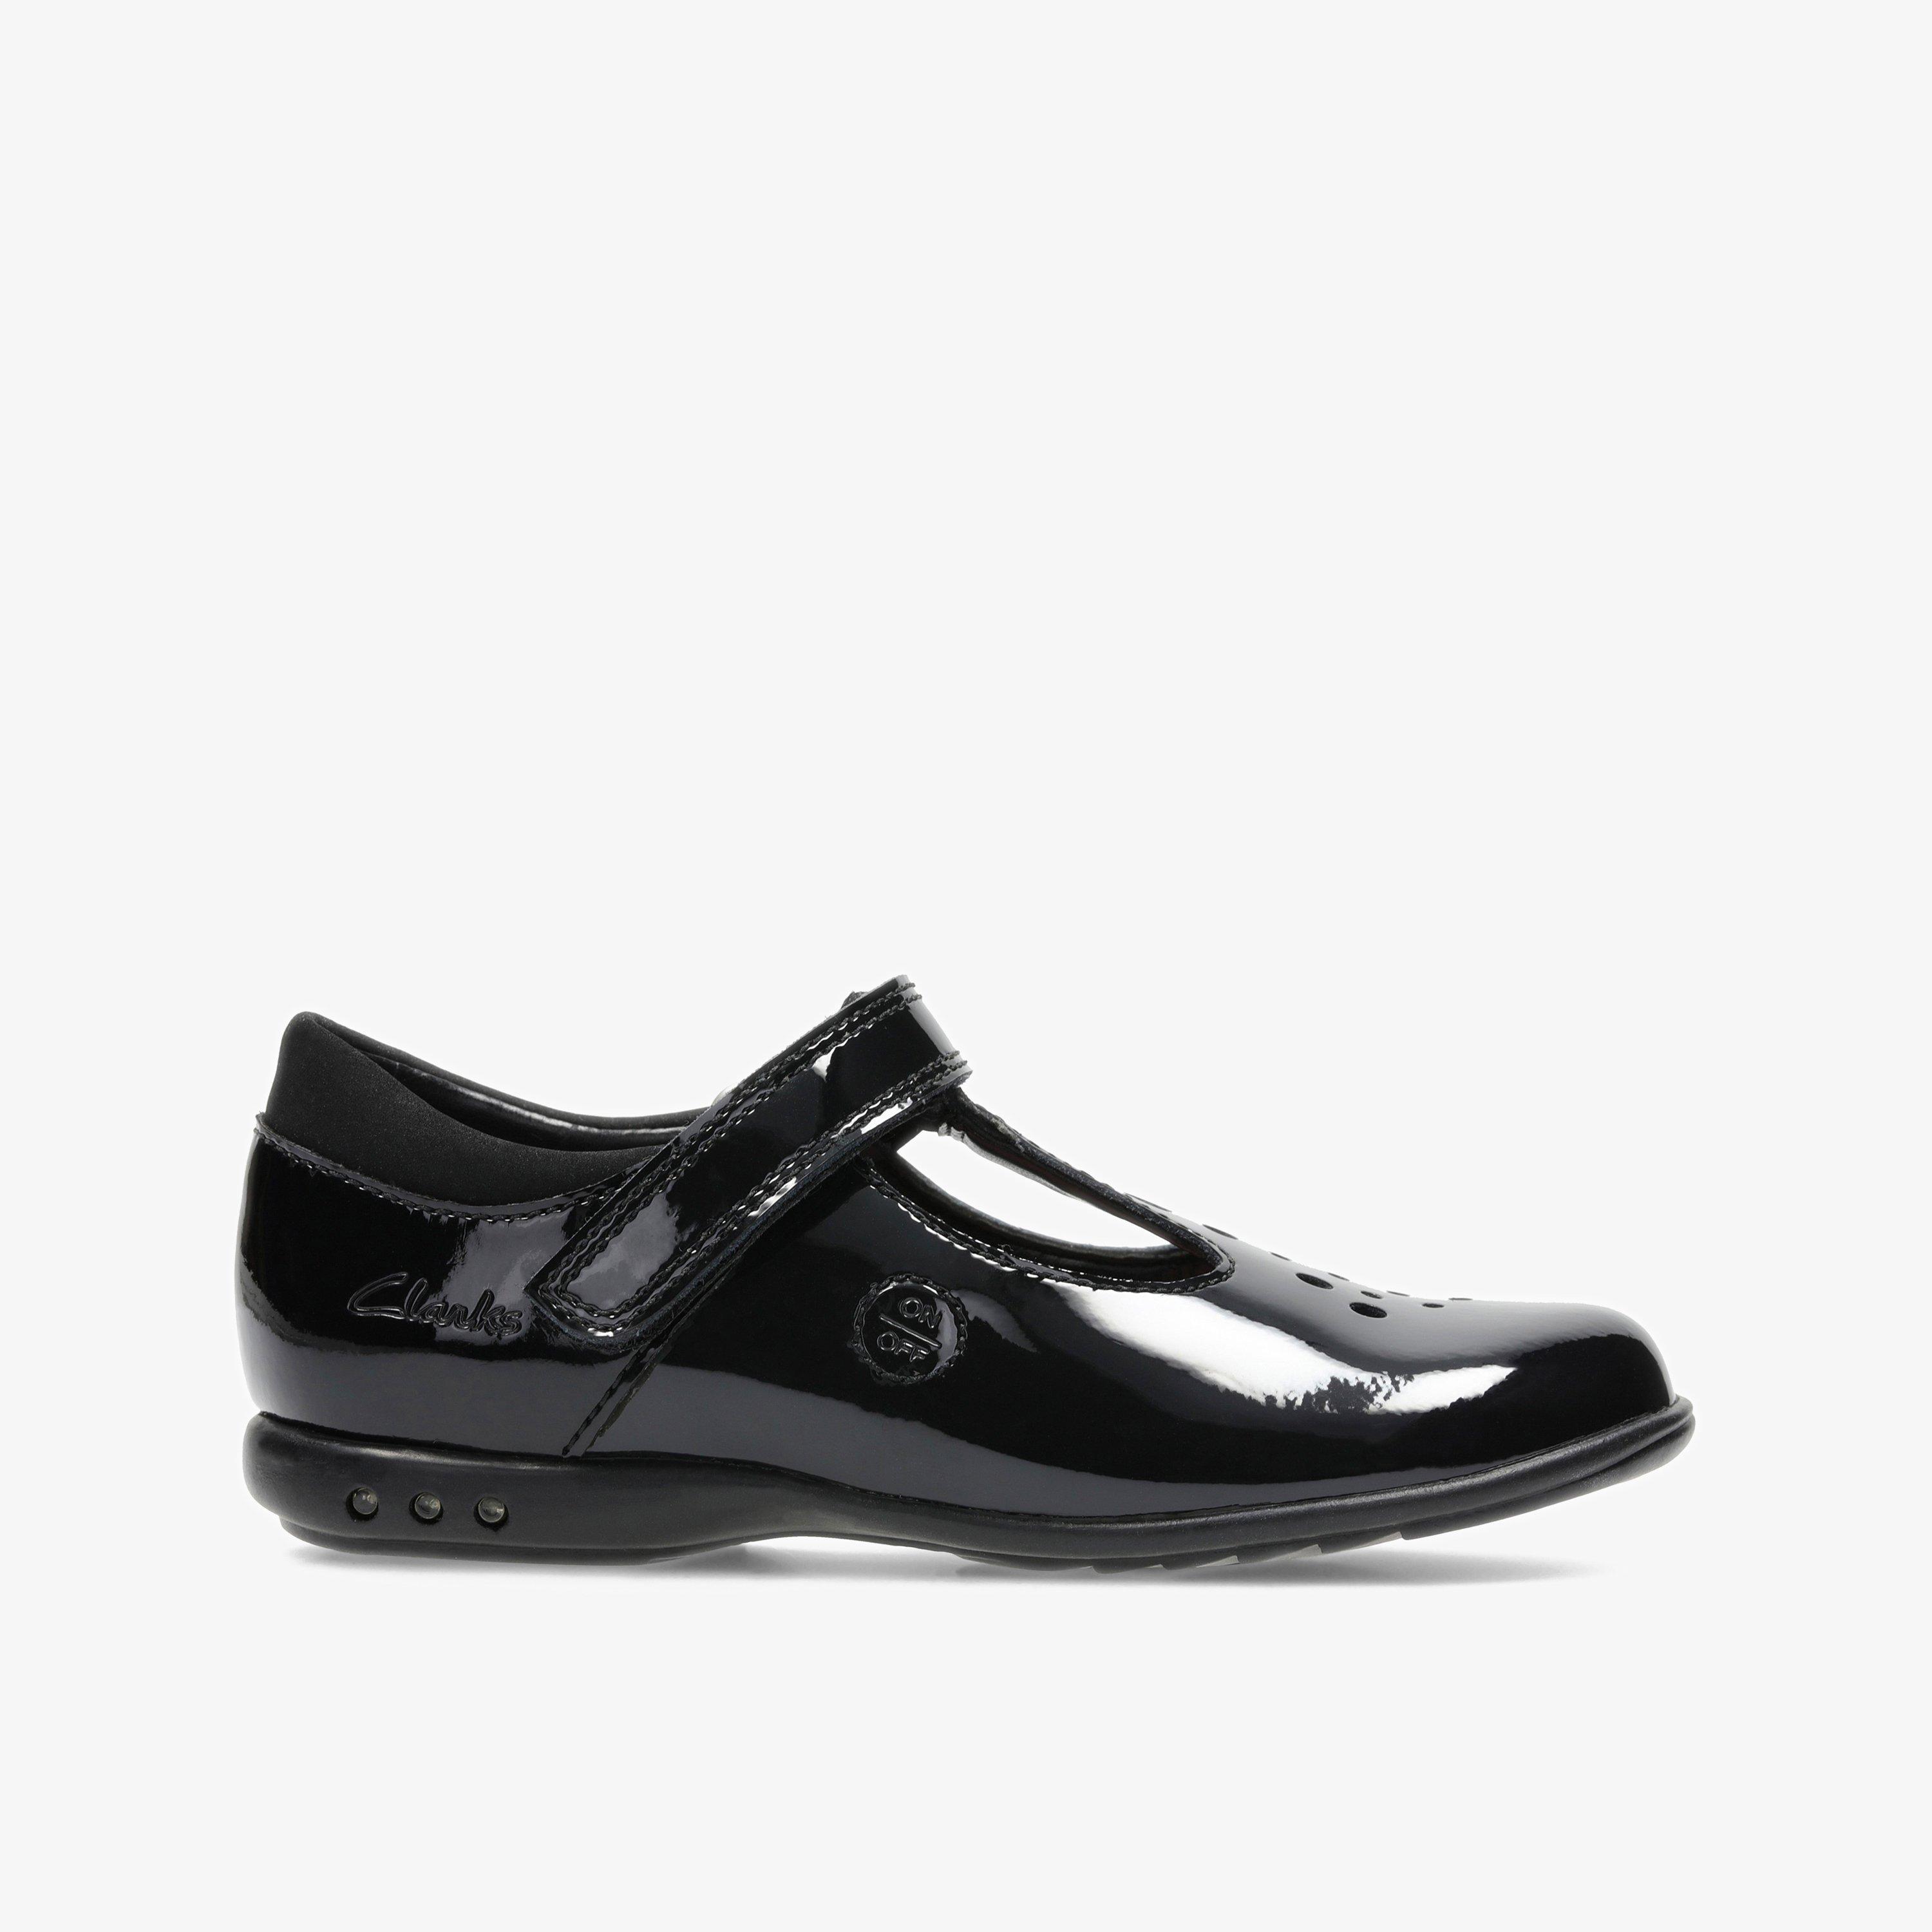 GIRLS Trixi Pip Toddler Black Patent Shoes | Clarks Outlet